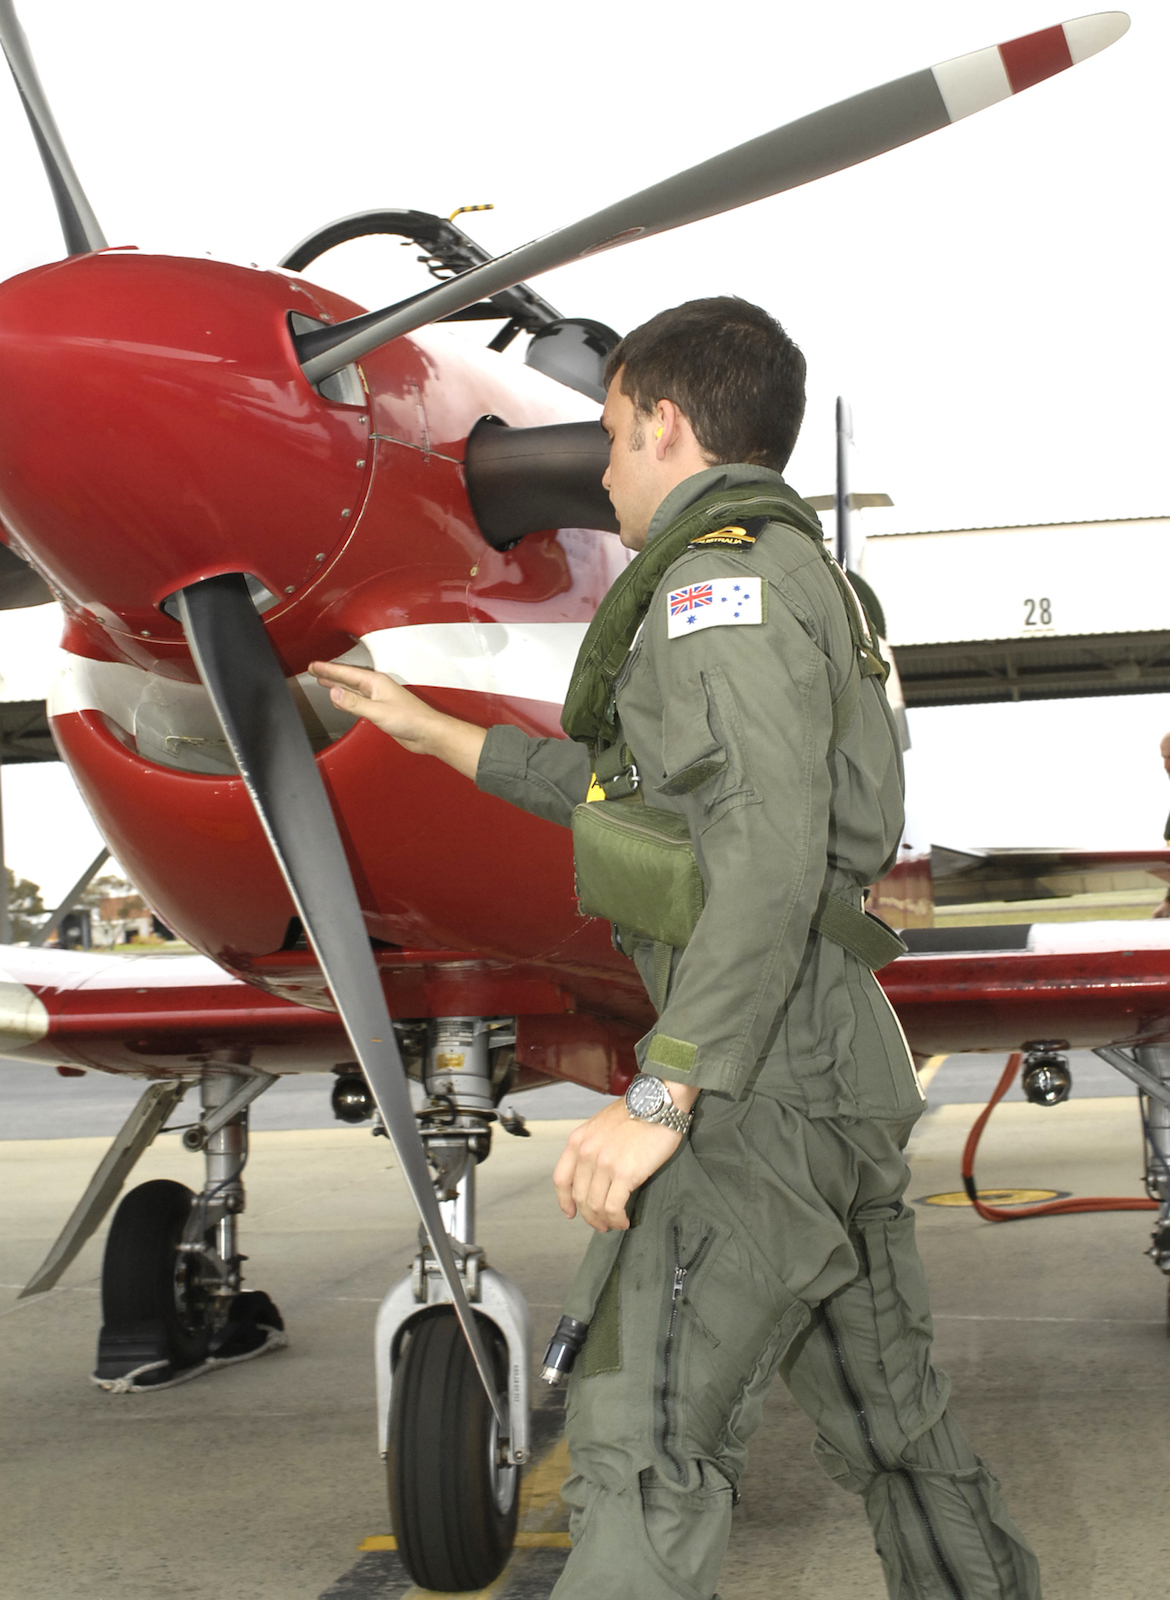 The higher speed of the PC-9 provides students with fresh challenges after the piston powered CT-4. (Defence)